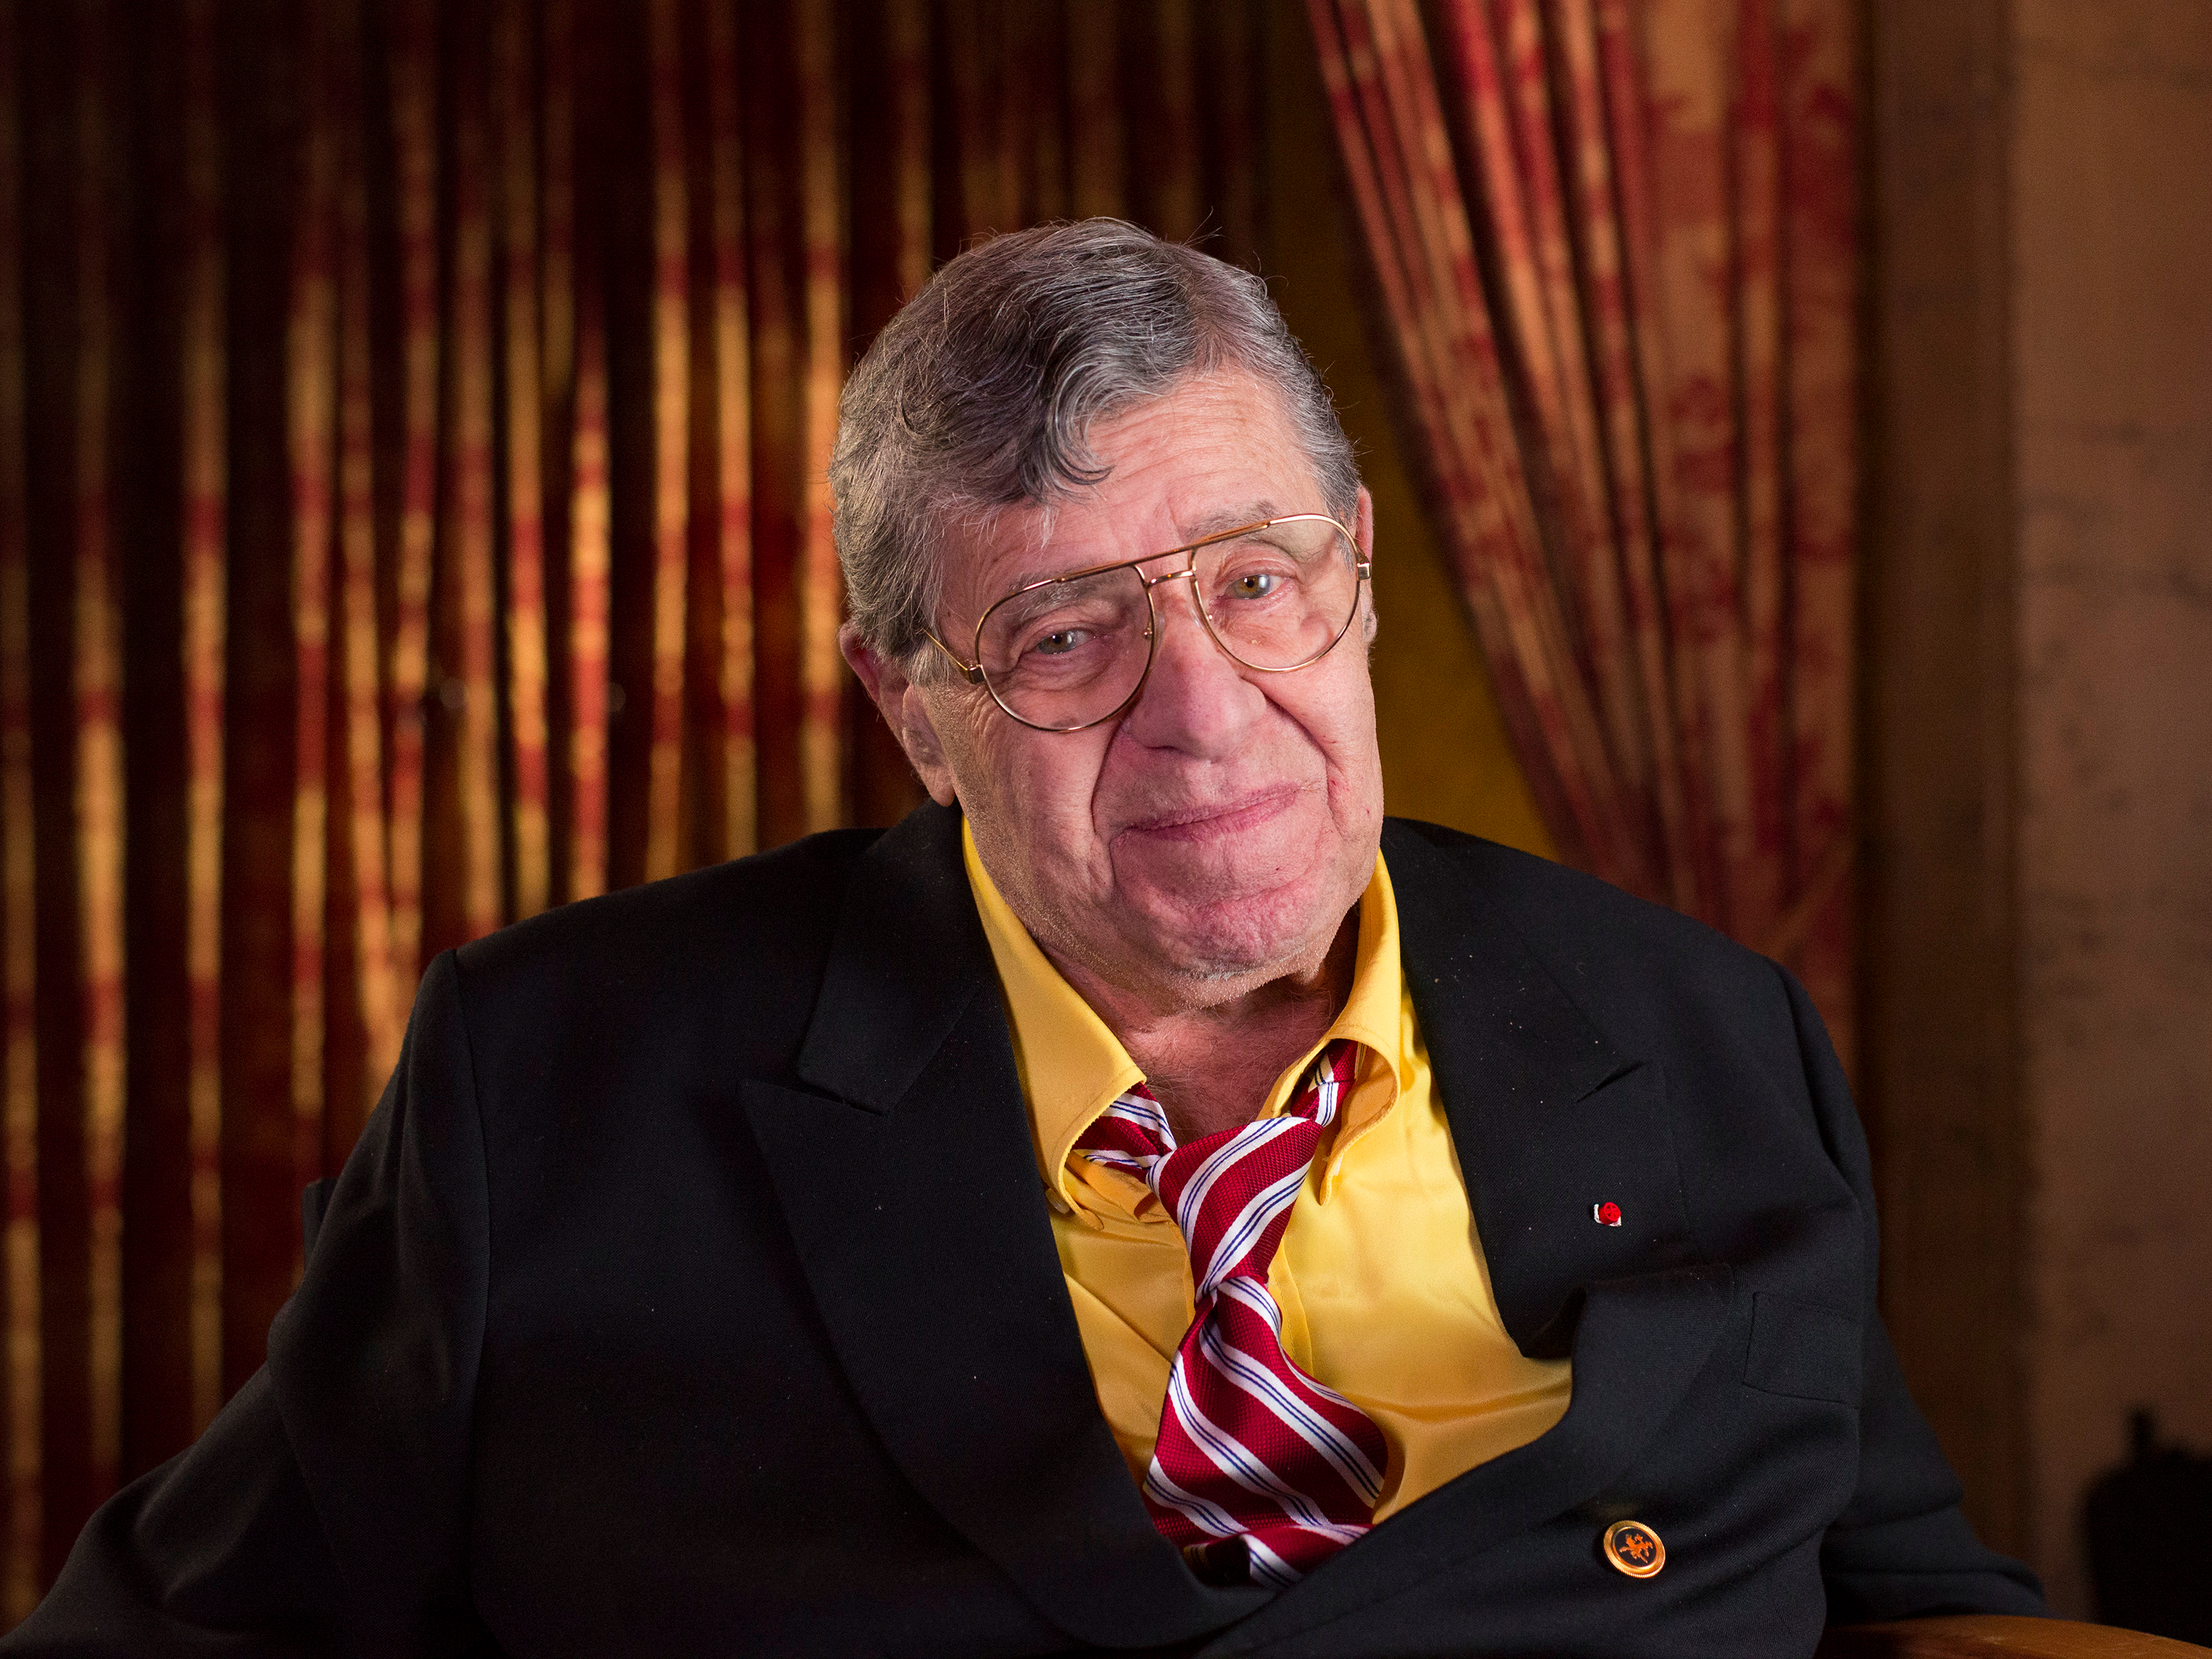 how long has jerry lewis been chairman of the muscular dystrophy drive